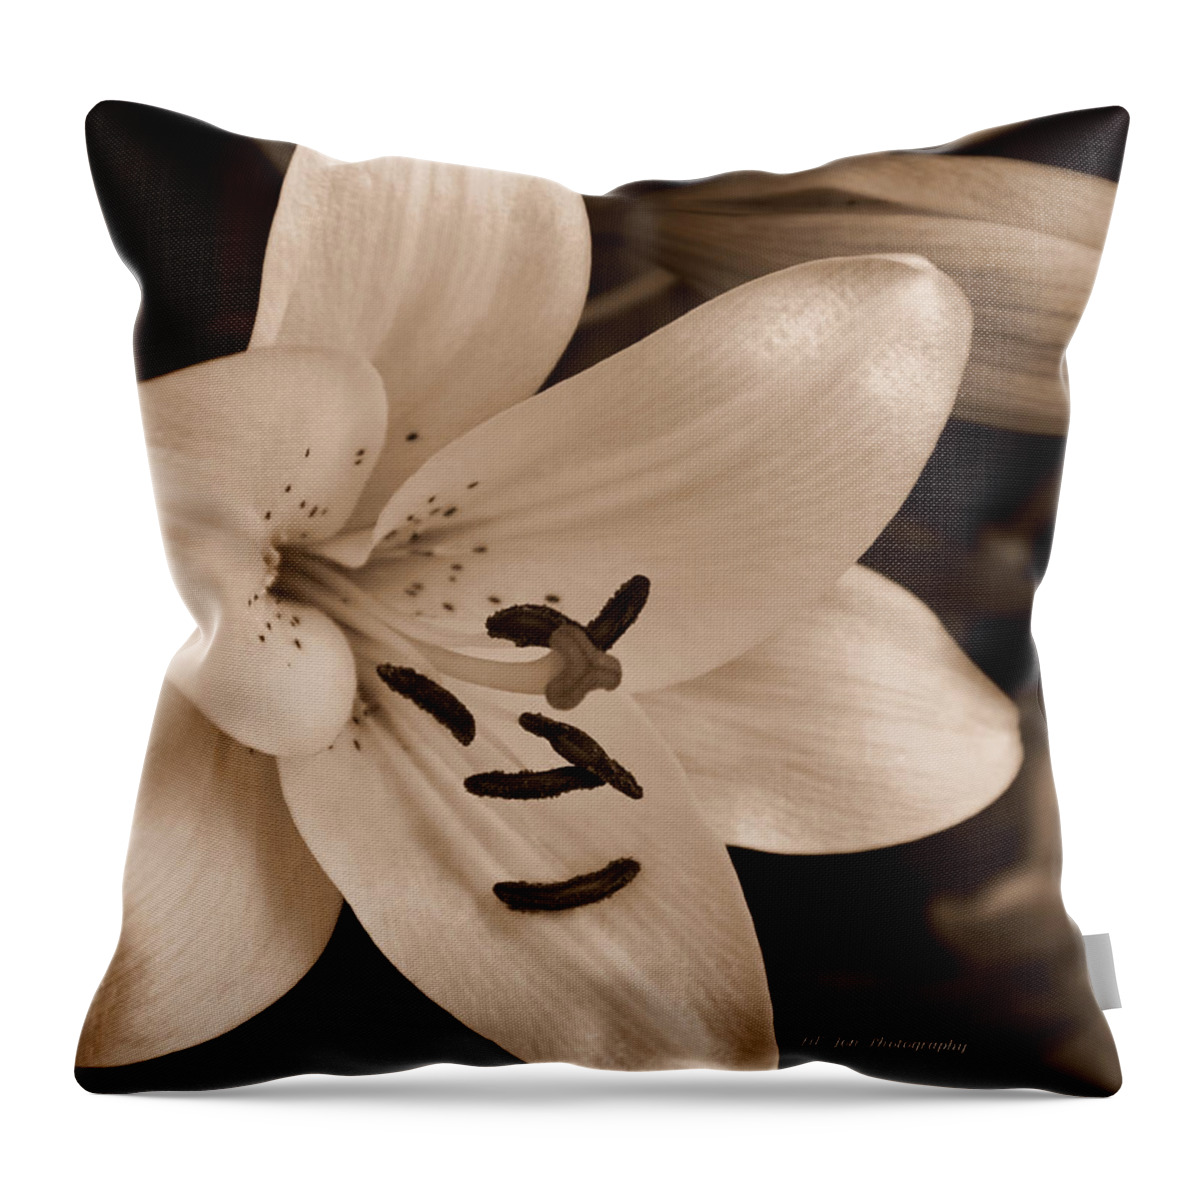 Old Throw Pillow featuring the photograph Old Fashioned Kind Of Love by Jeanette C Landstrom